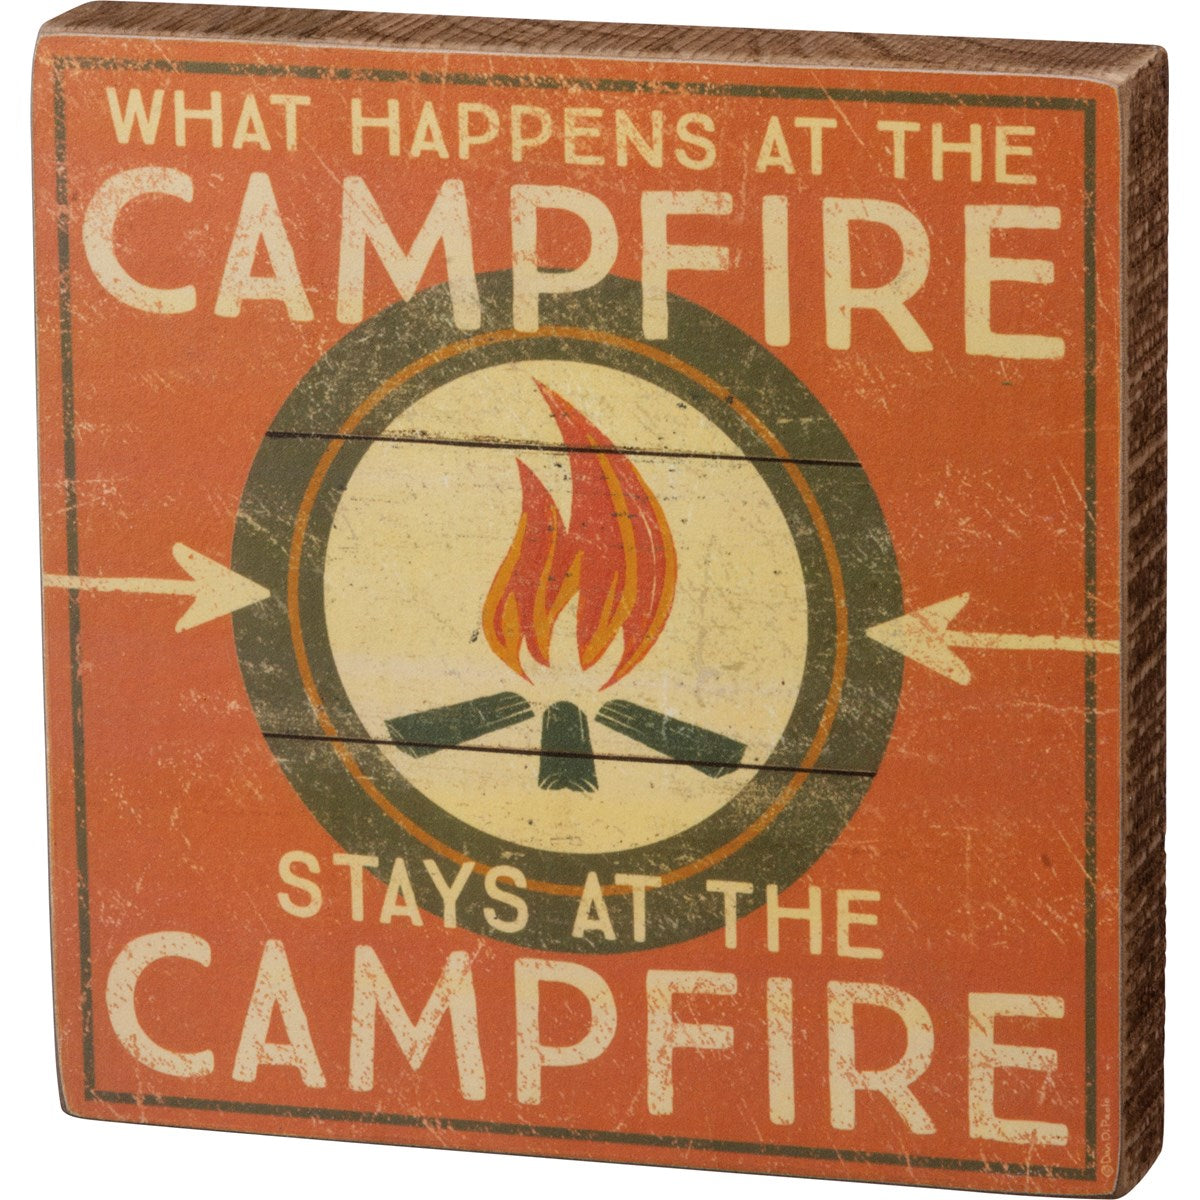 What Happens At The Campfire Stays at the Campfire 6" Box Sign